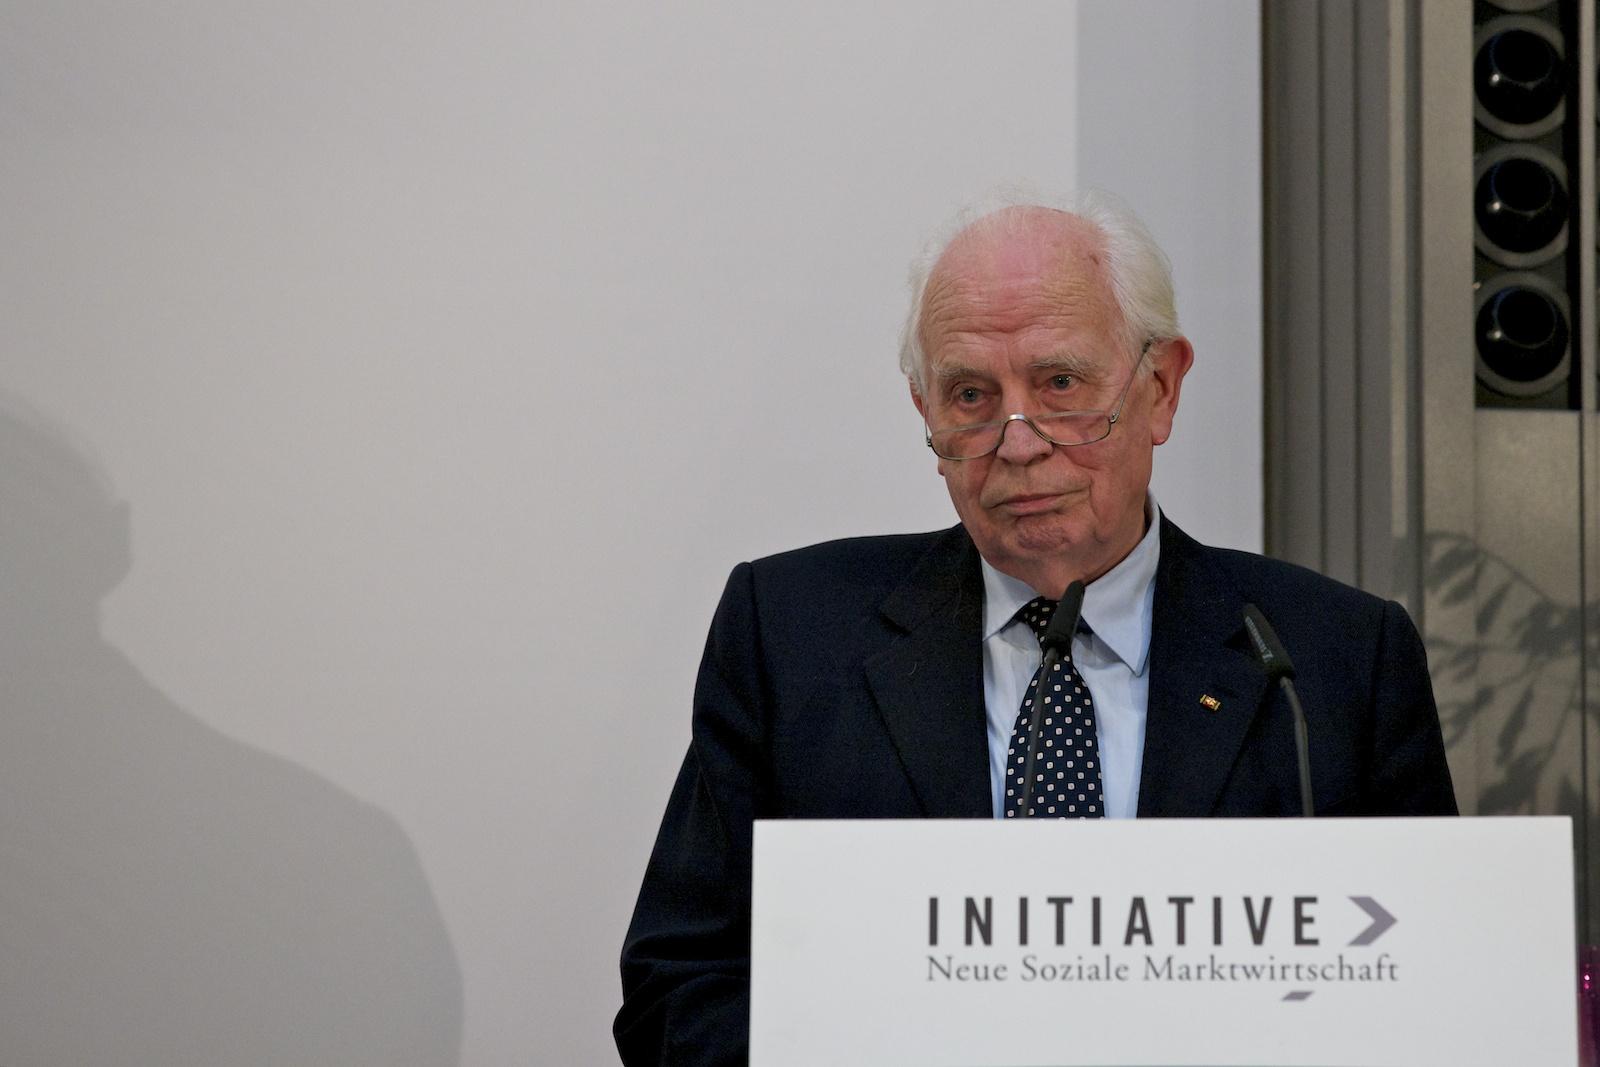 Ludwig-Erhard-Lecture 2011